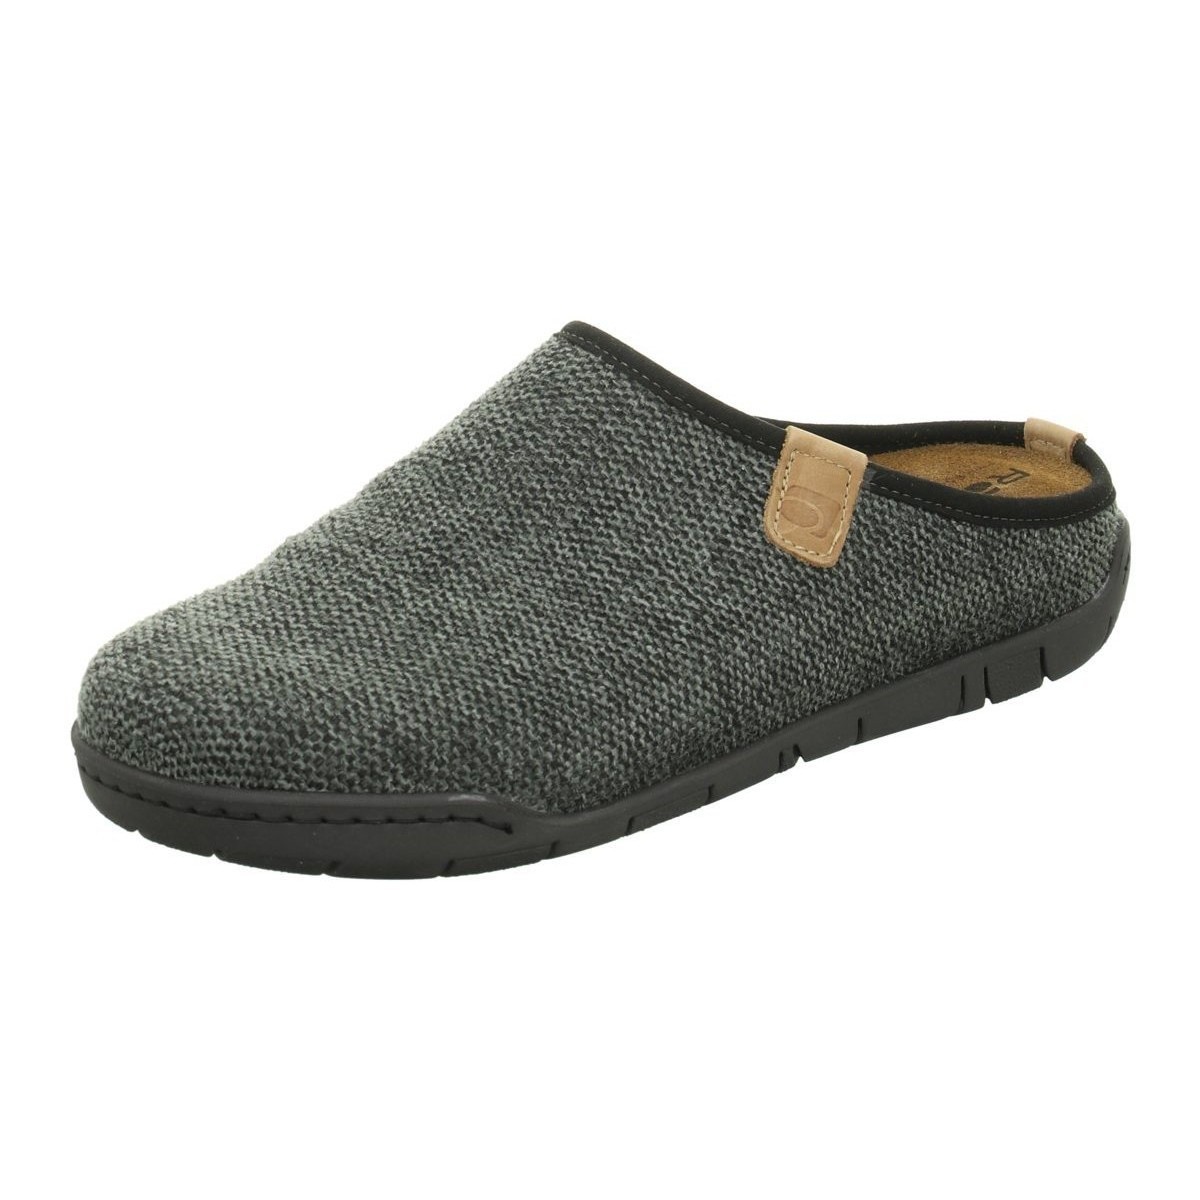 Chaussures Homme Chaussons Rohde  Gris